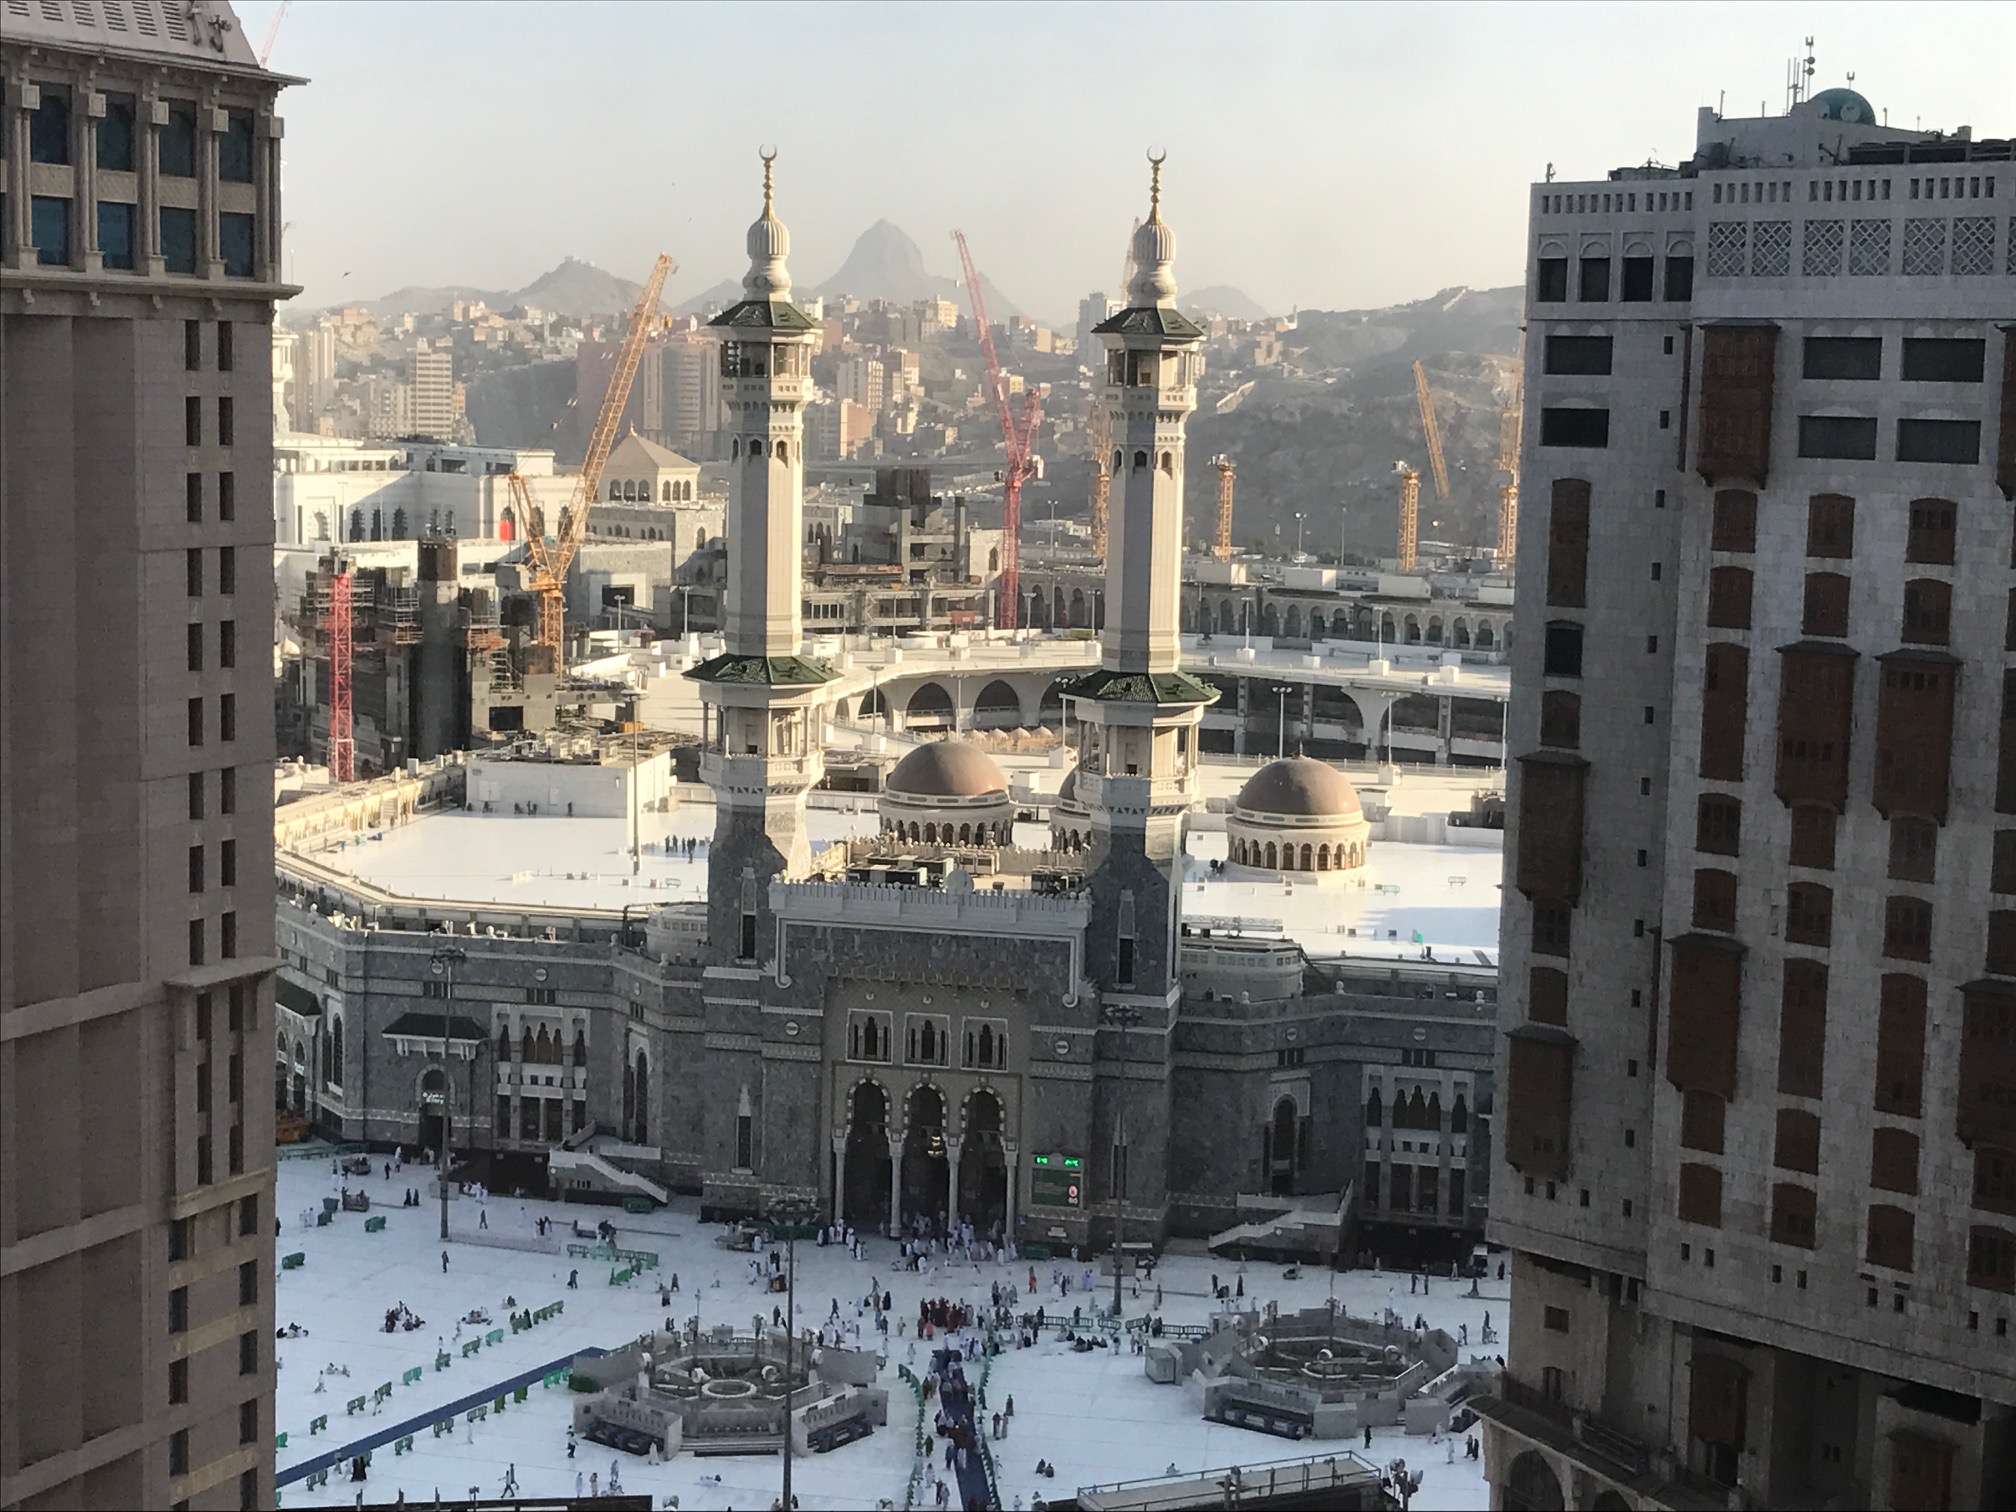 King Fahad Gate of Masjid Al Haram in Mecca – PointChaser